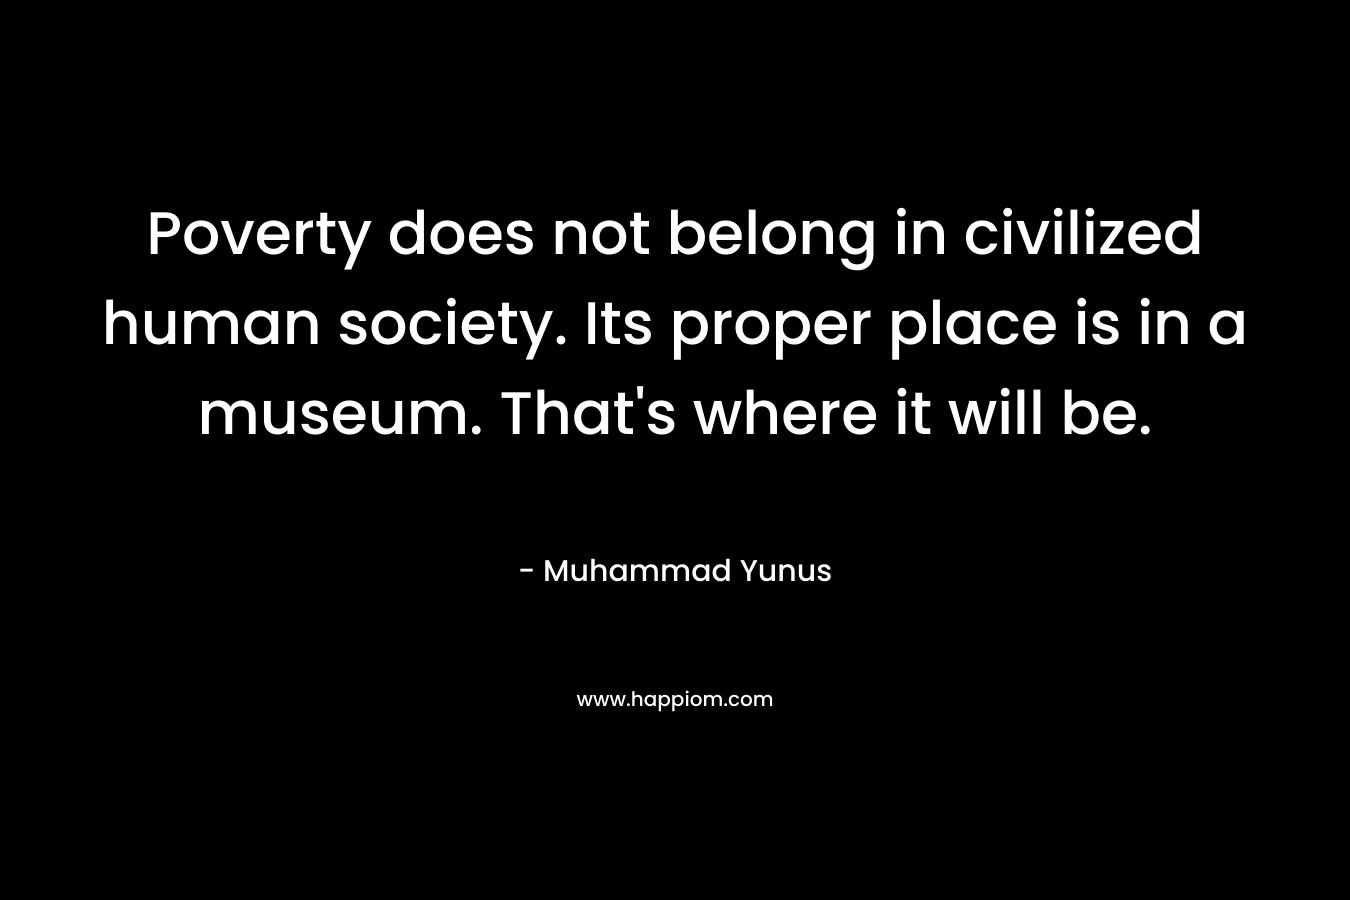 Poverty does not belong in civilized human society. Its proper place is in a museum. That’s where it will be. – Muhammad Yunus